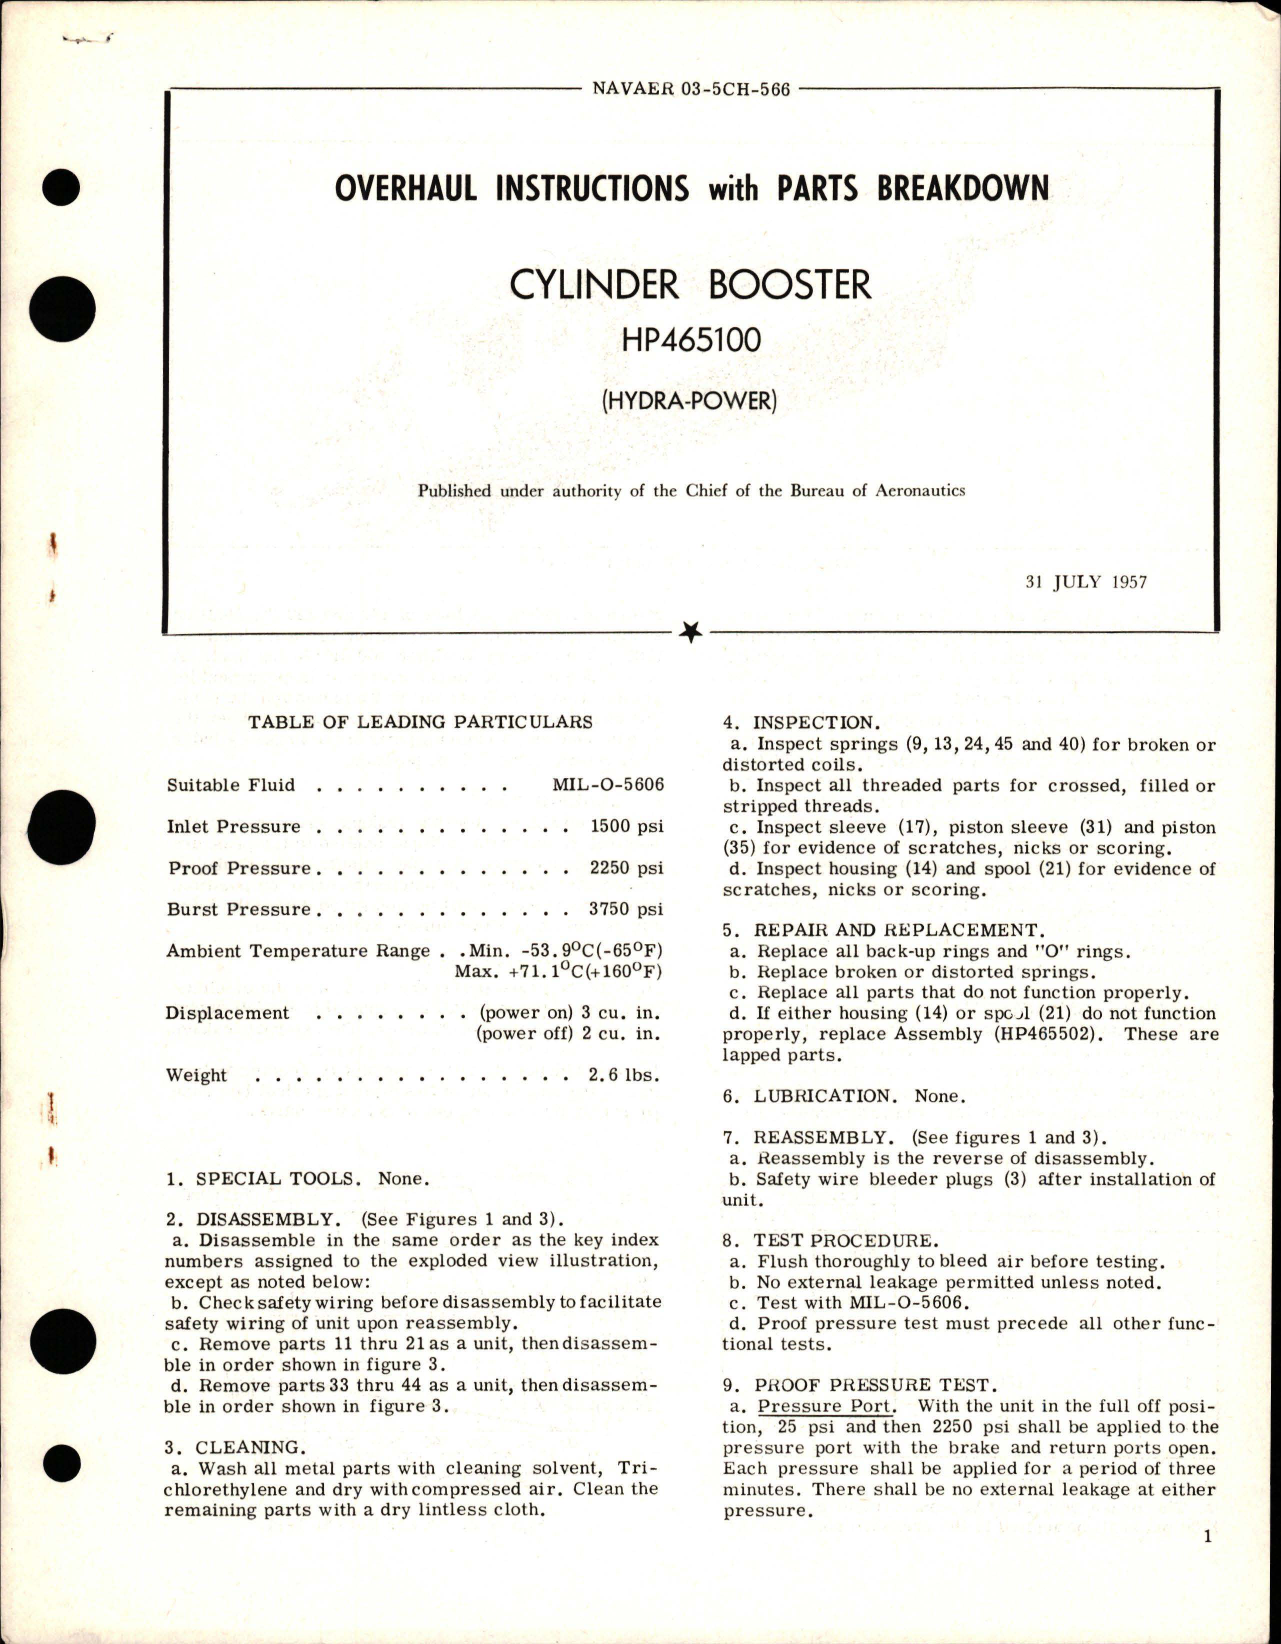 Sample page 1 from AirCorps Library document: Overhaul Instructions with Parts Breakdown for Cylinder Booster - HP465100